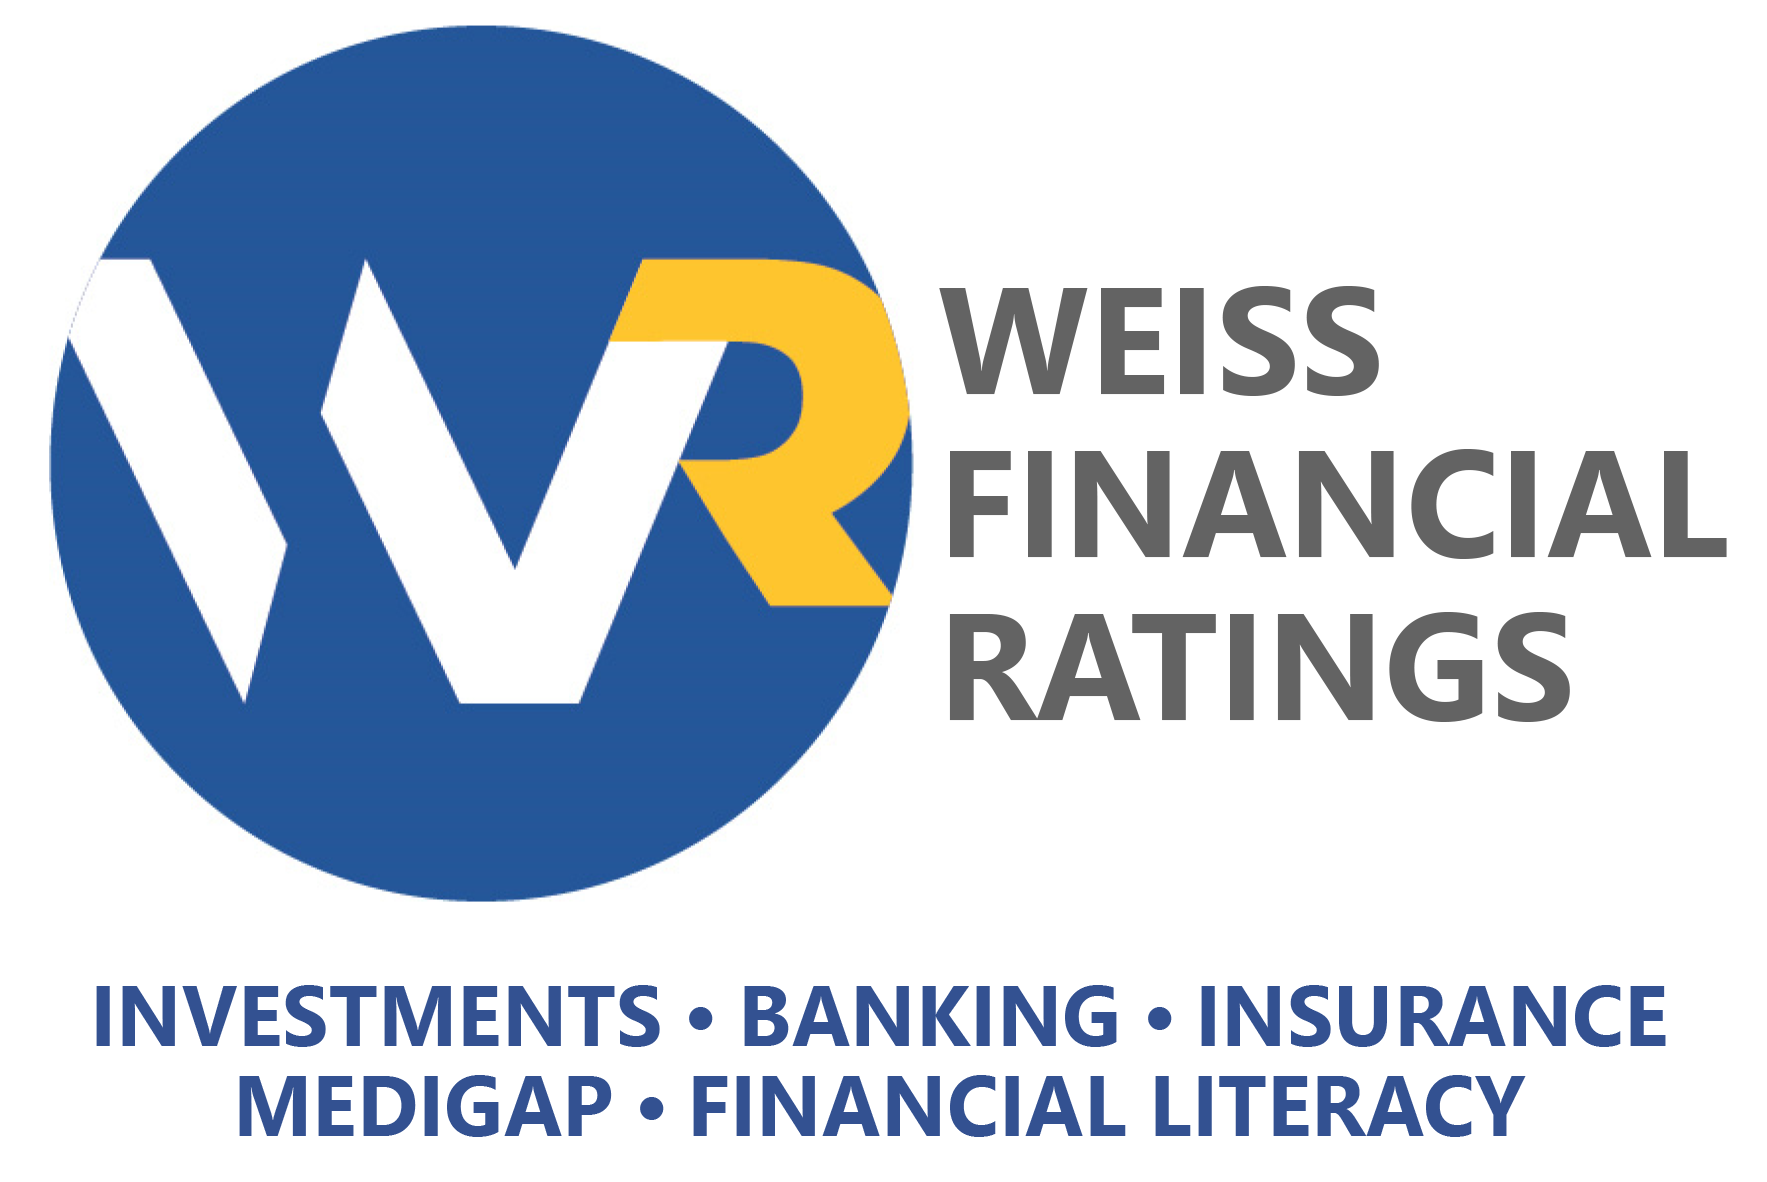 Weiss Financial Ratings is a new resource available to SFPL cardholders through AVL.